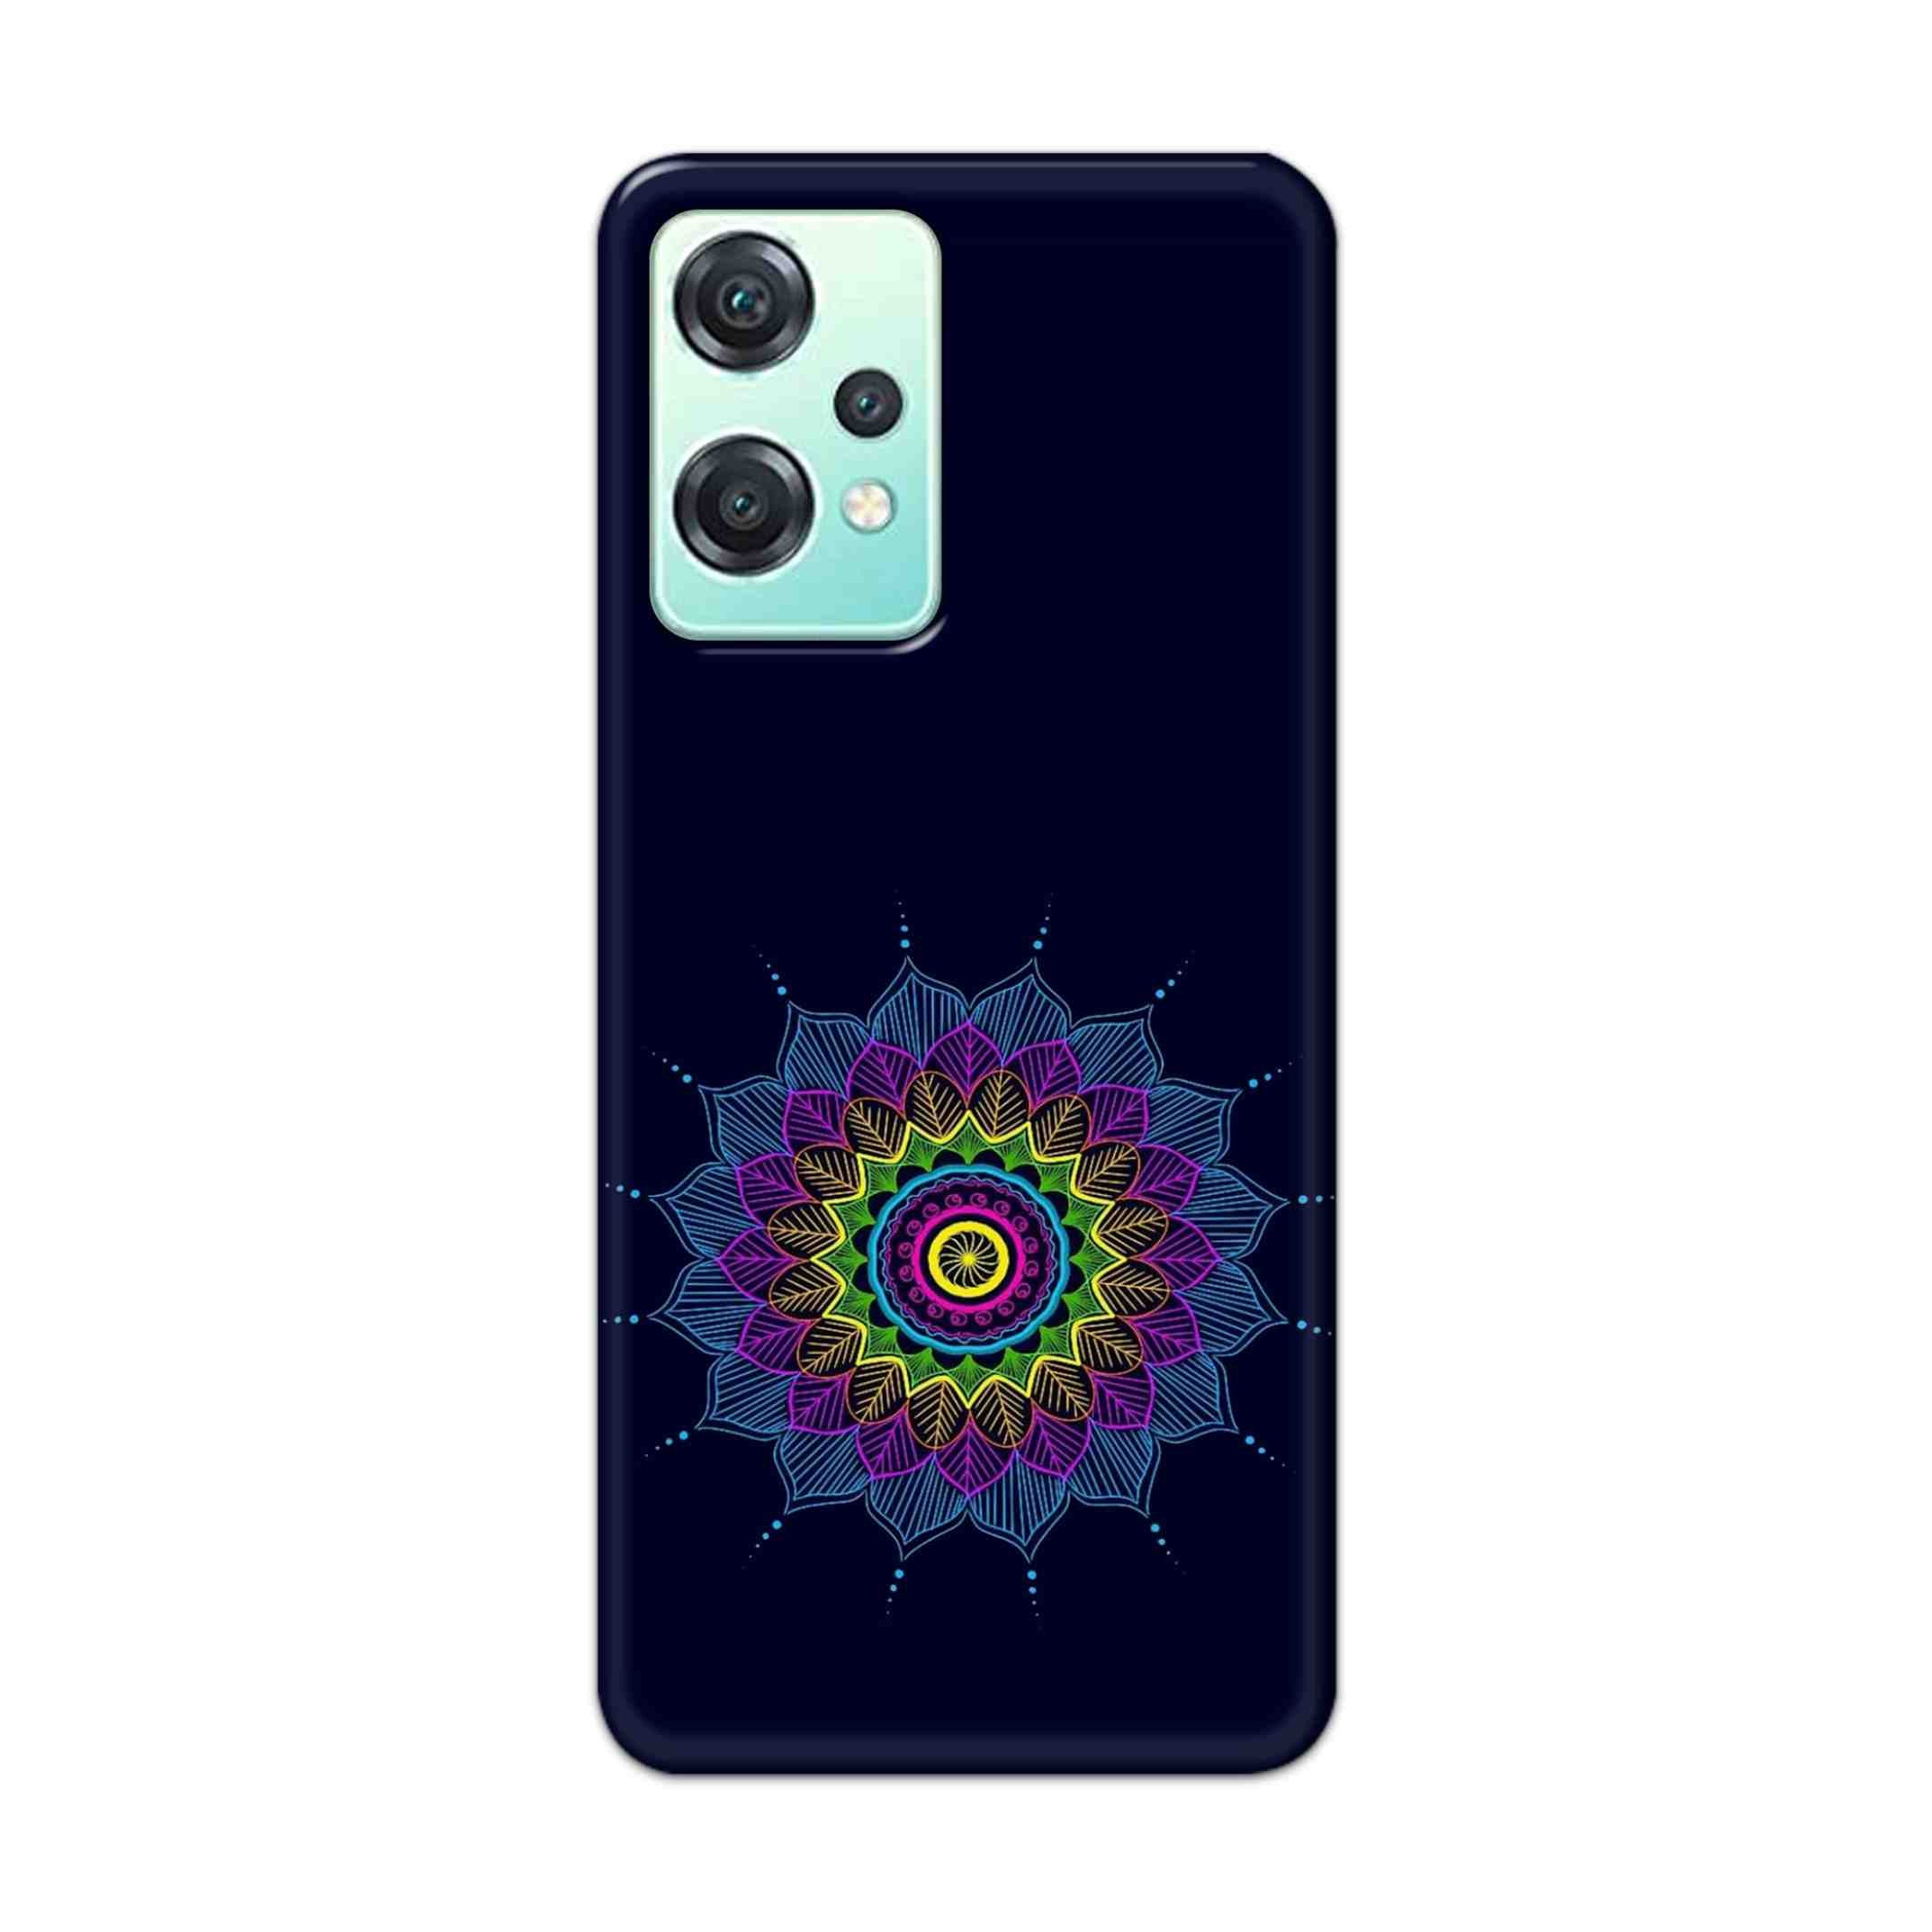 Buy Jung And Mandalas Hard Back Mobile Phone Case Cover For OnePlus Nord CE 2 Lite 5G Online